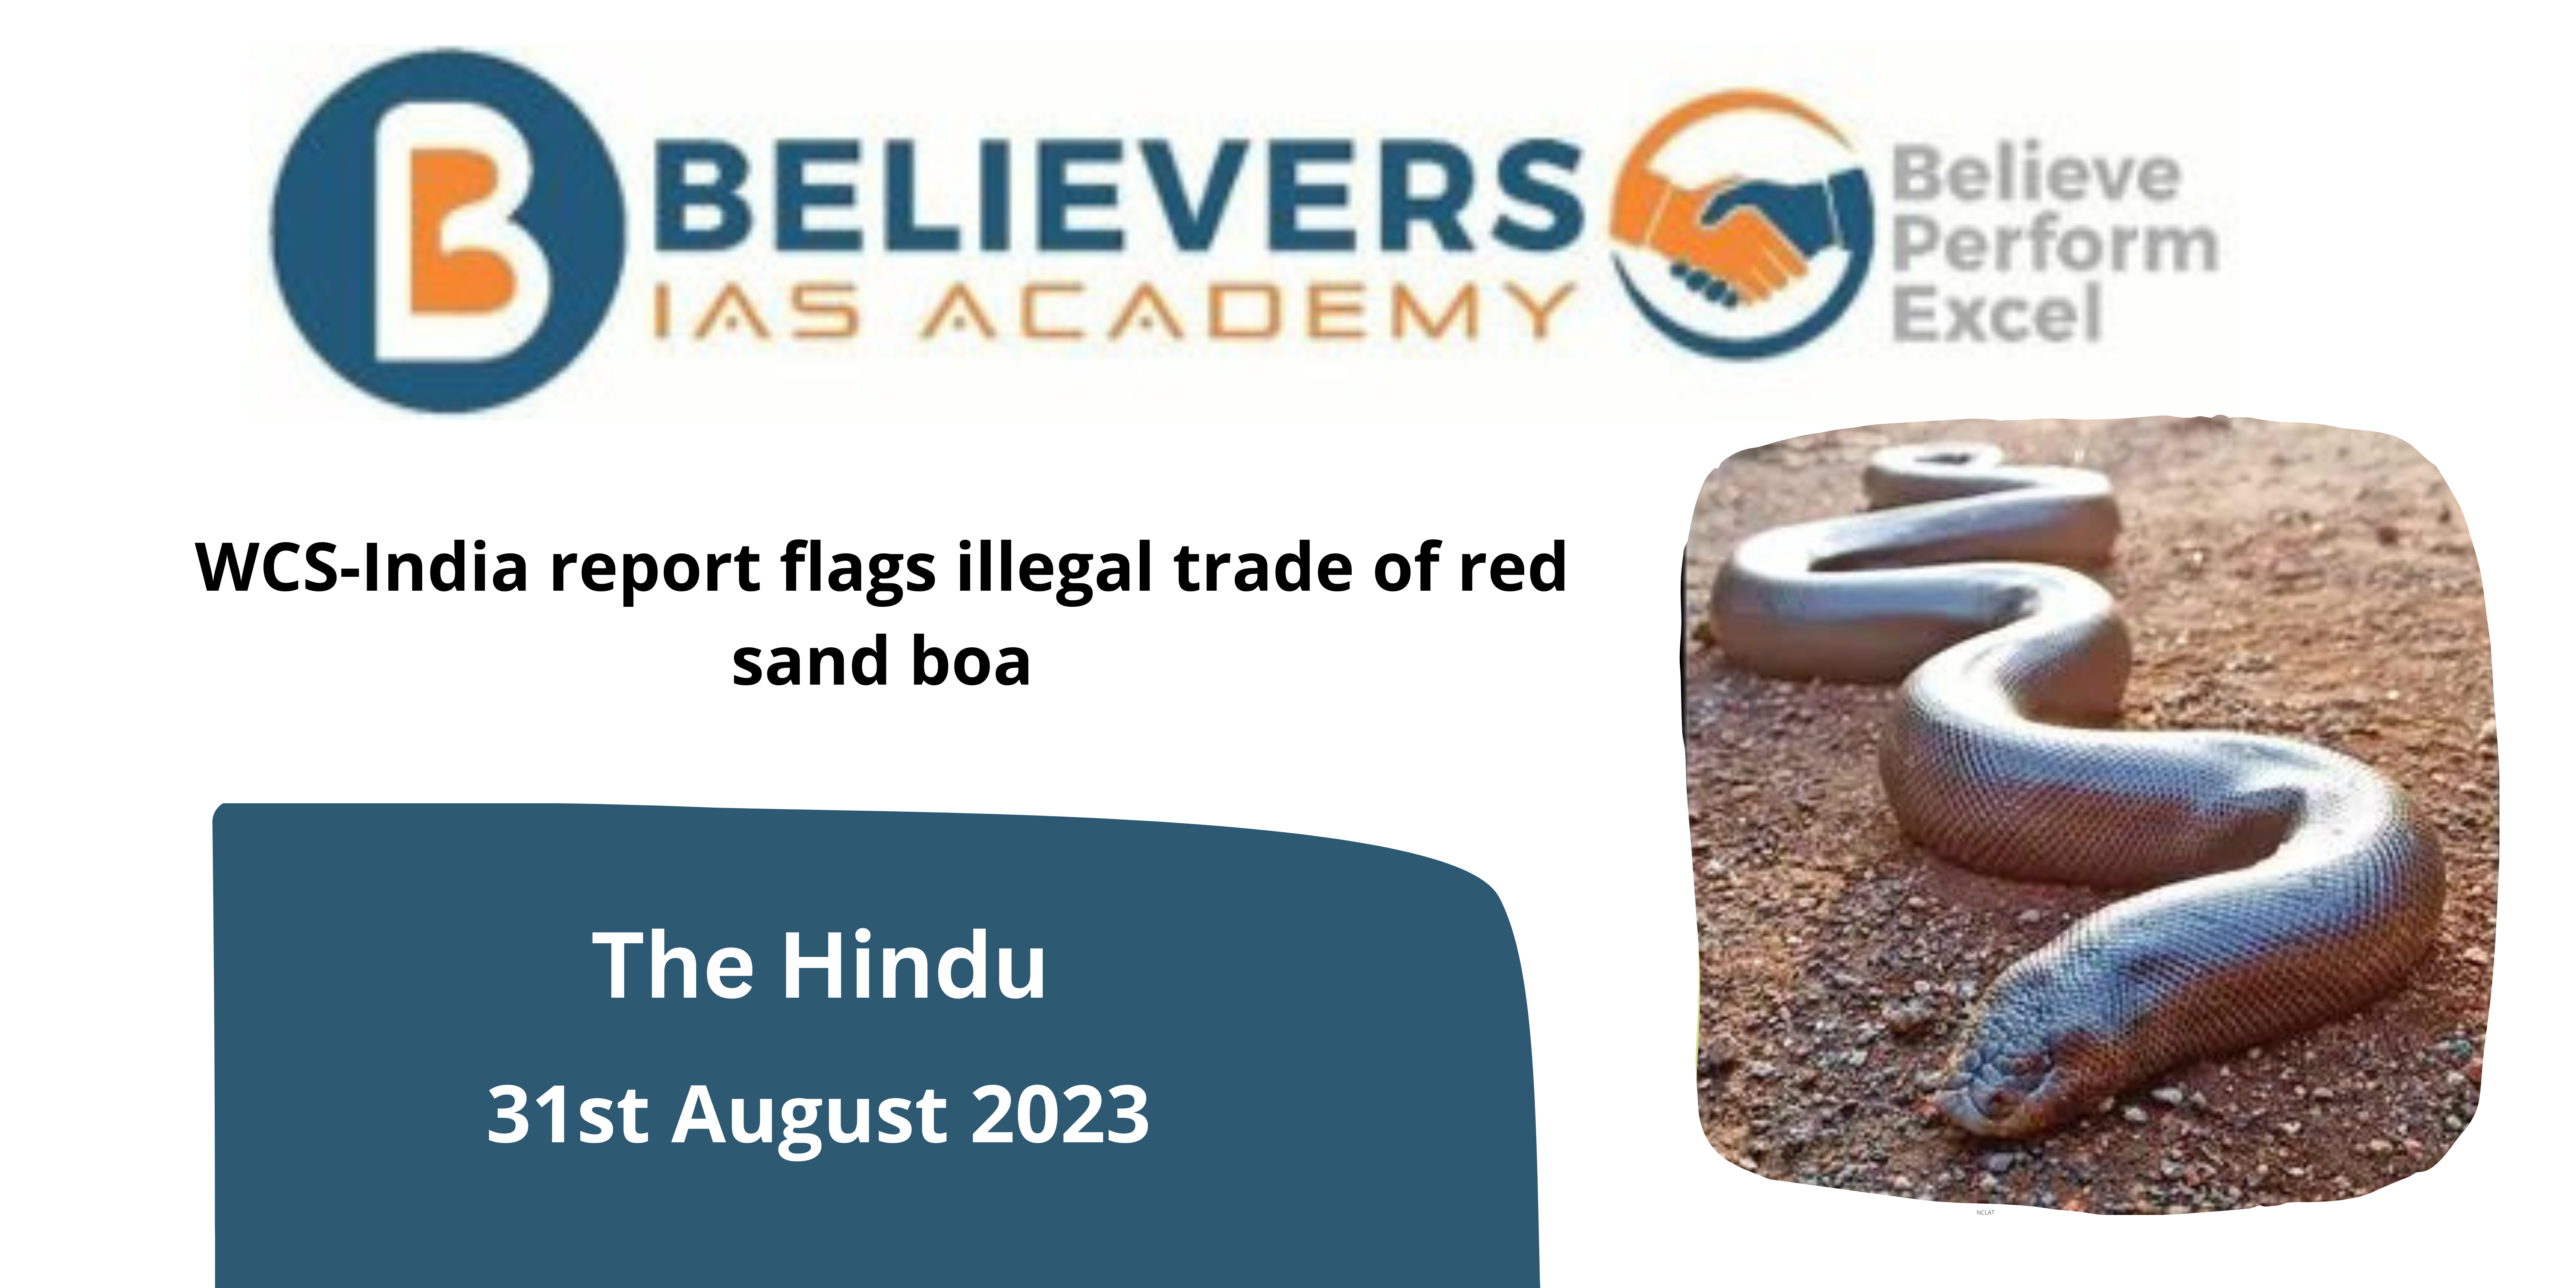 WCS-India report flags illegal trade of red sand boa